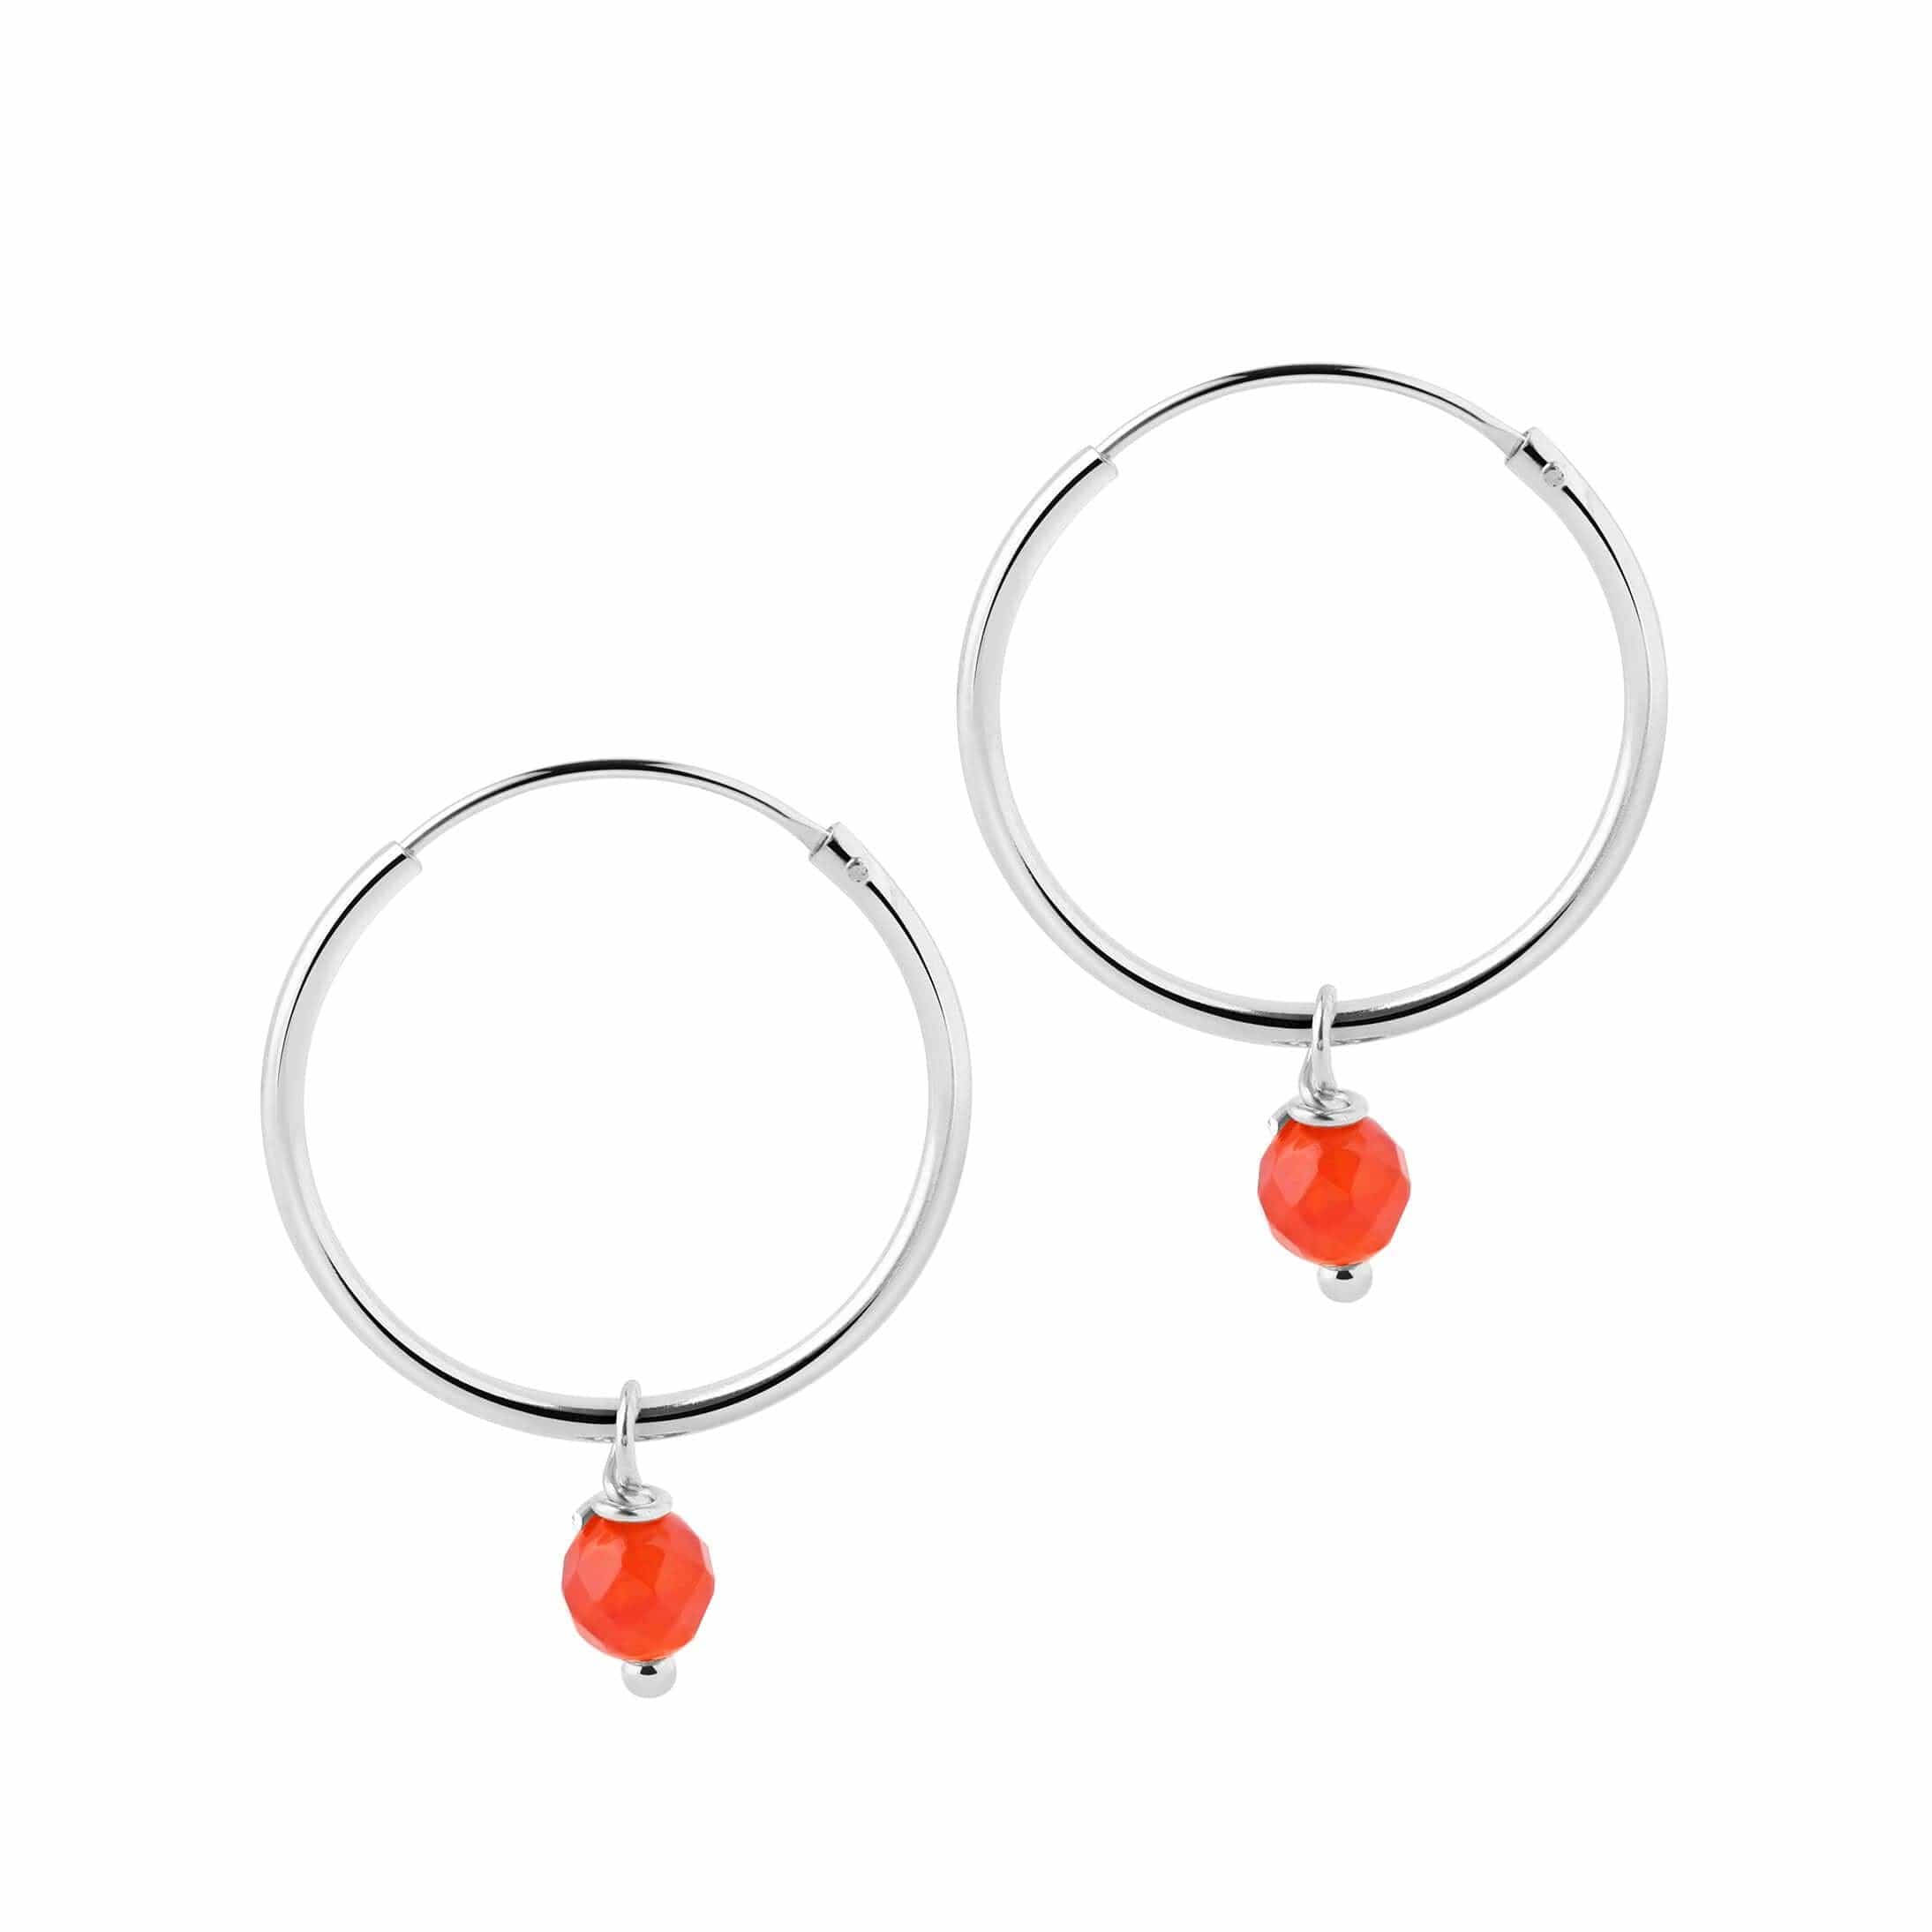 18mm silver Hoop Earrings with Red Stone